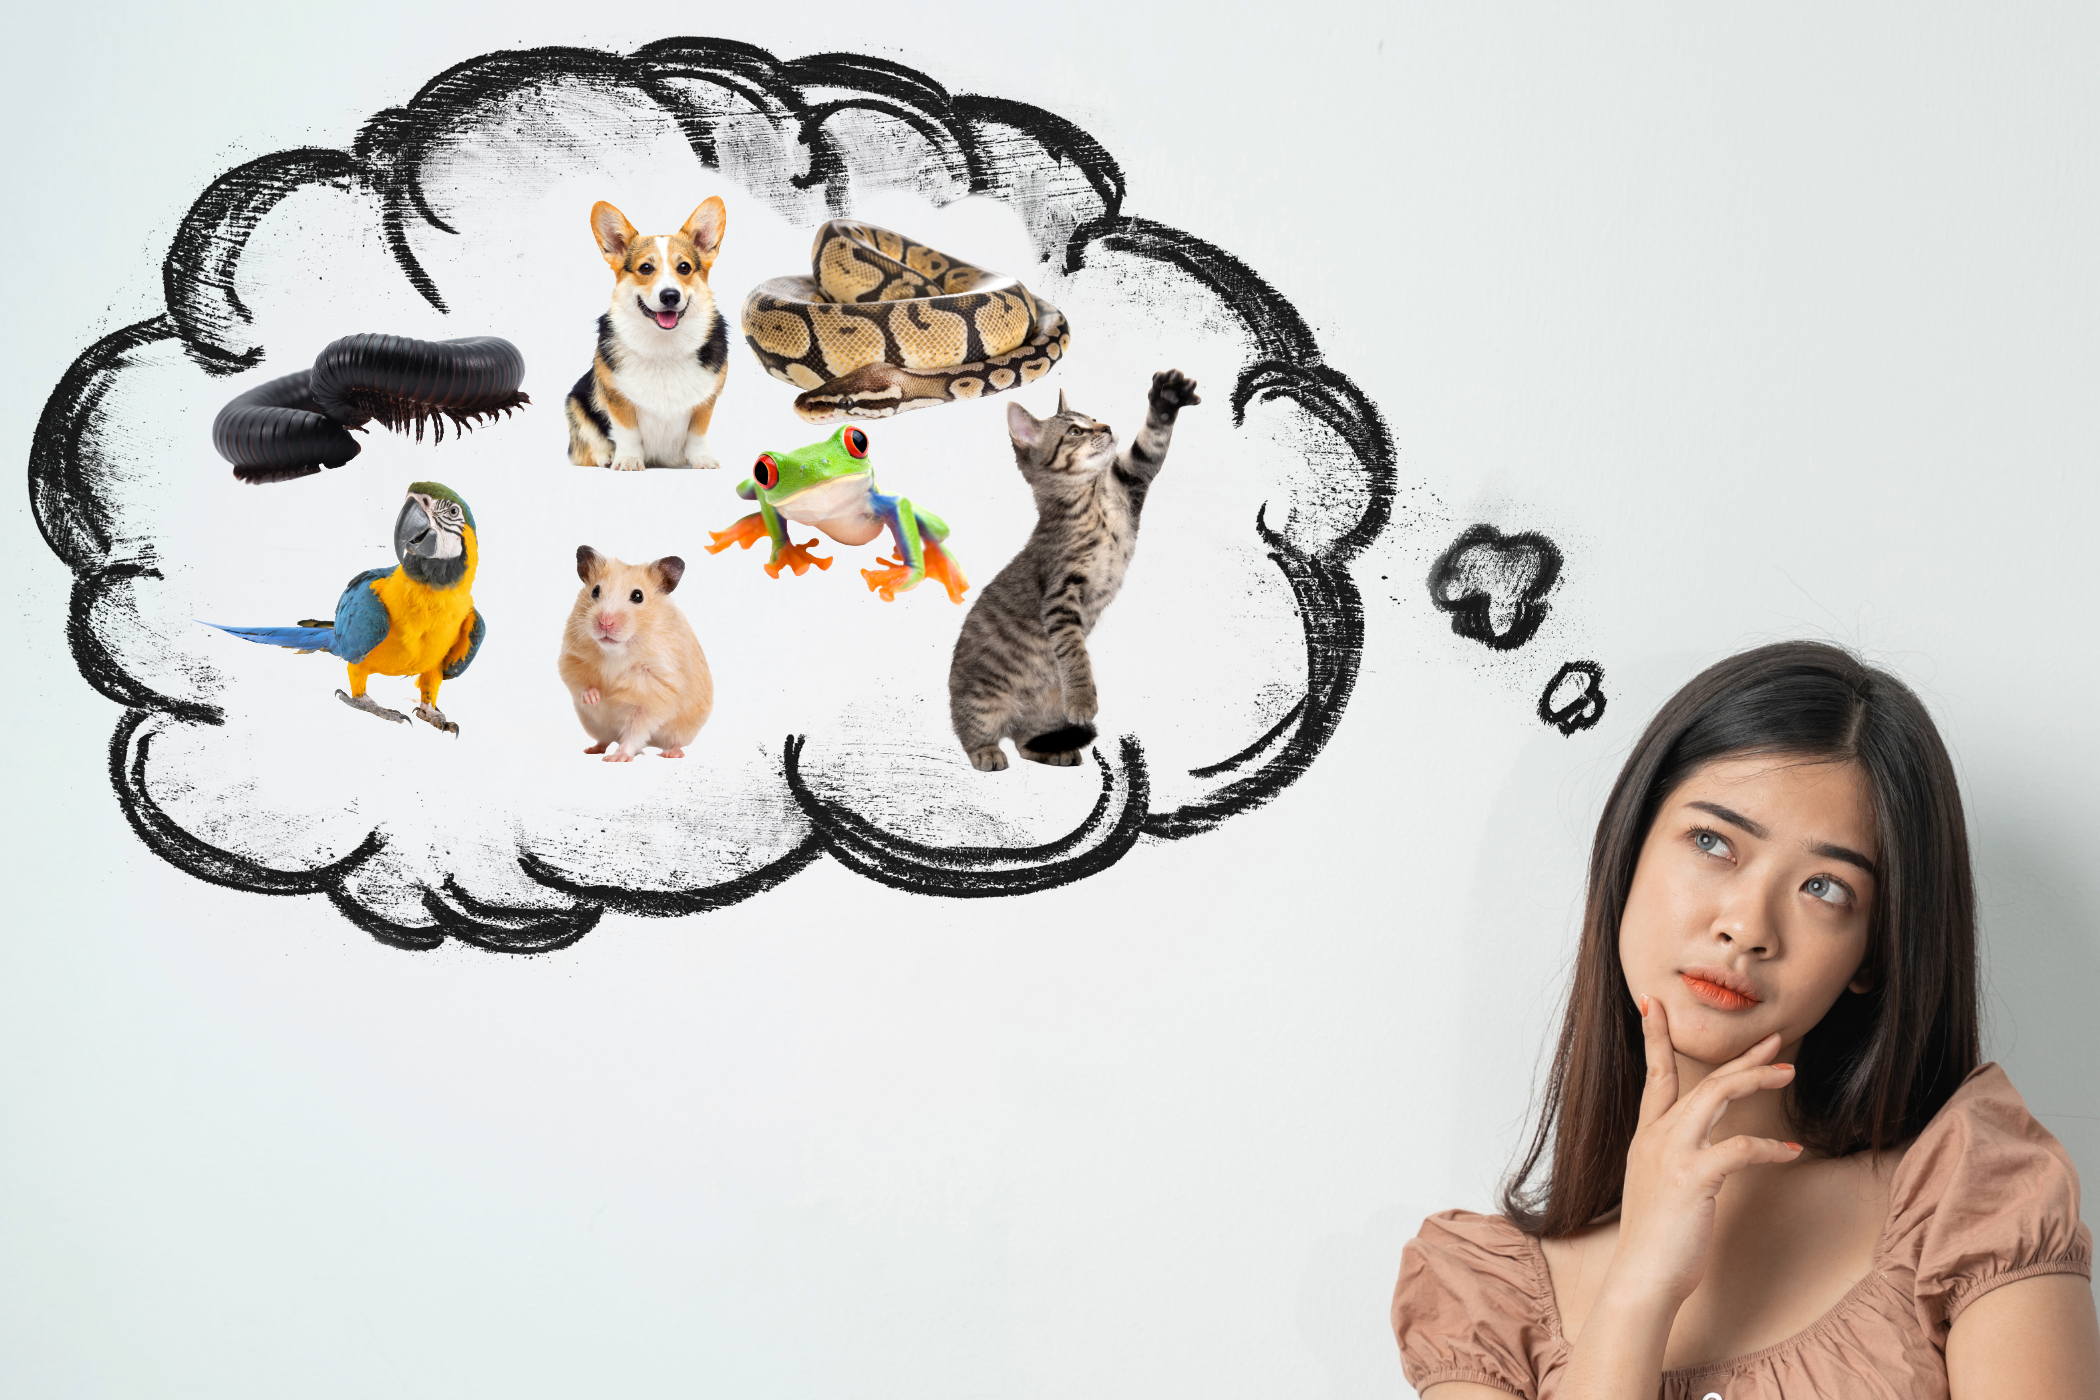 How to find the perfect pet, woman contemplating different pet options.